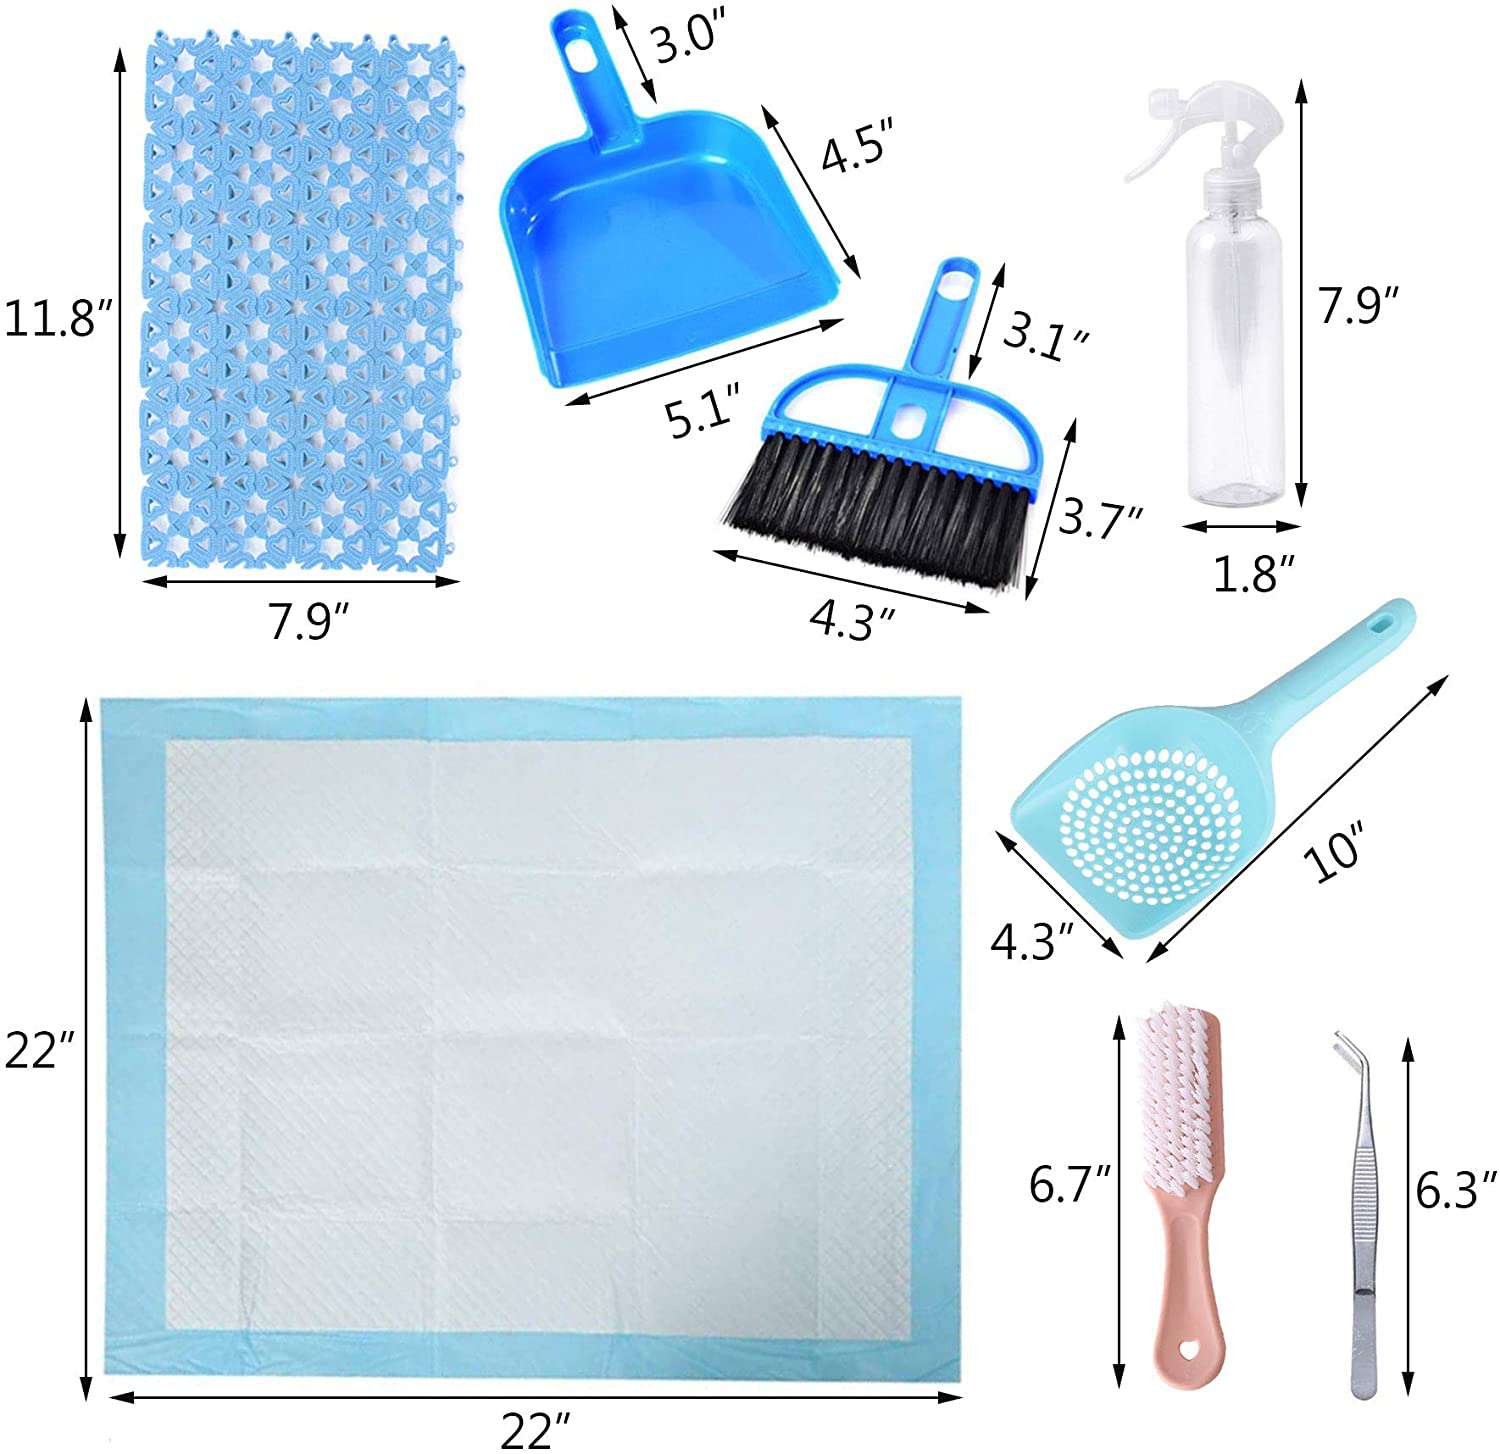 Hamiledyi Small Pet Cage Cleaner Set, Disposable Rabbit Cage Liner, Guinea Pig Playpen Mini Hand Broom Dustpan, Cleaning Brush Sand Scooper Floor for Rabbit Chinchilla Hedgehogs